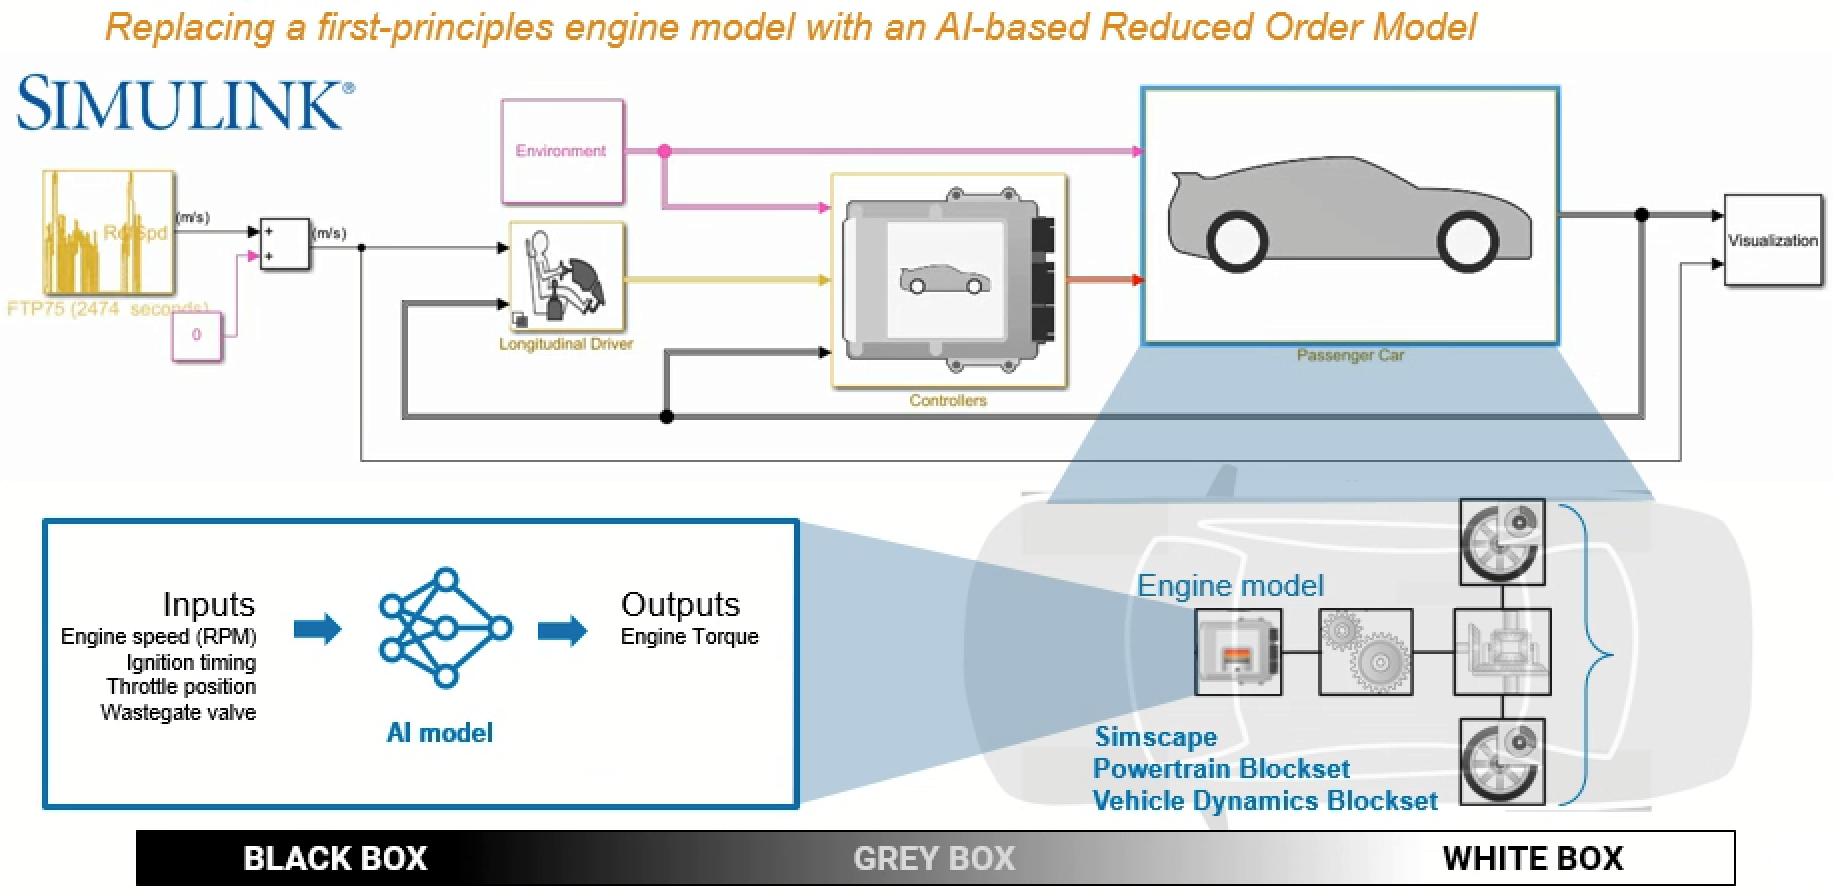 Replace a high-fidelity engine model with an AI-based model to reduce complexity and speed up the system simulation